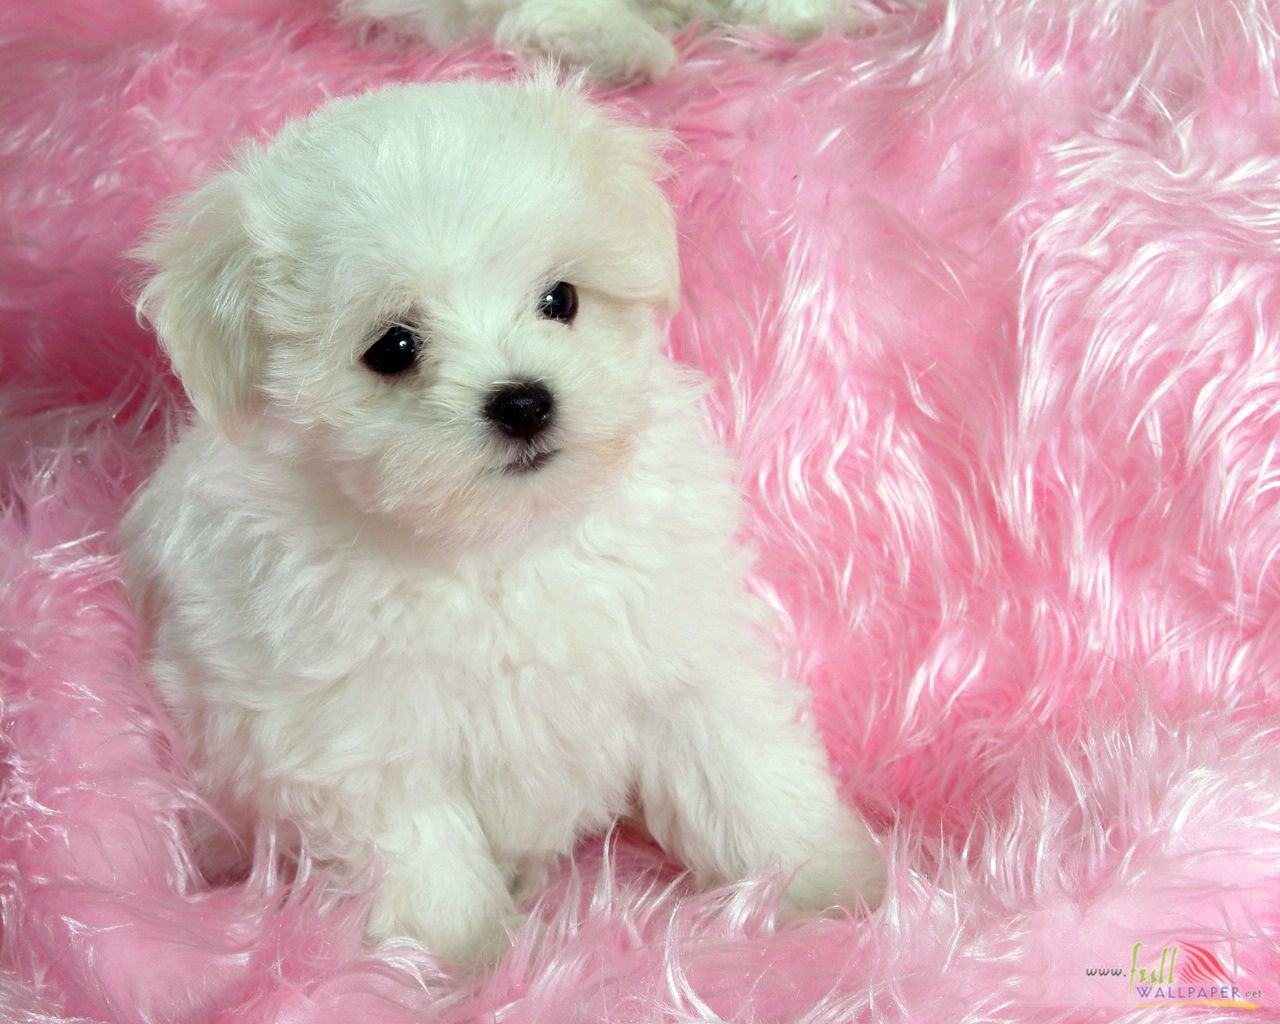 Cute Baby Dog Best Hd Wallpapers   Litle Pups 1280x1024